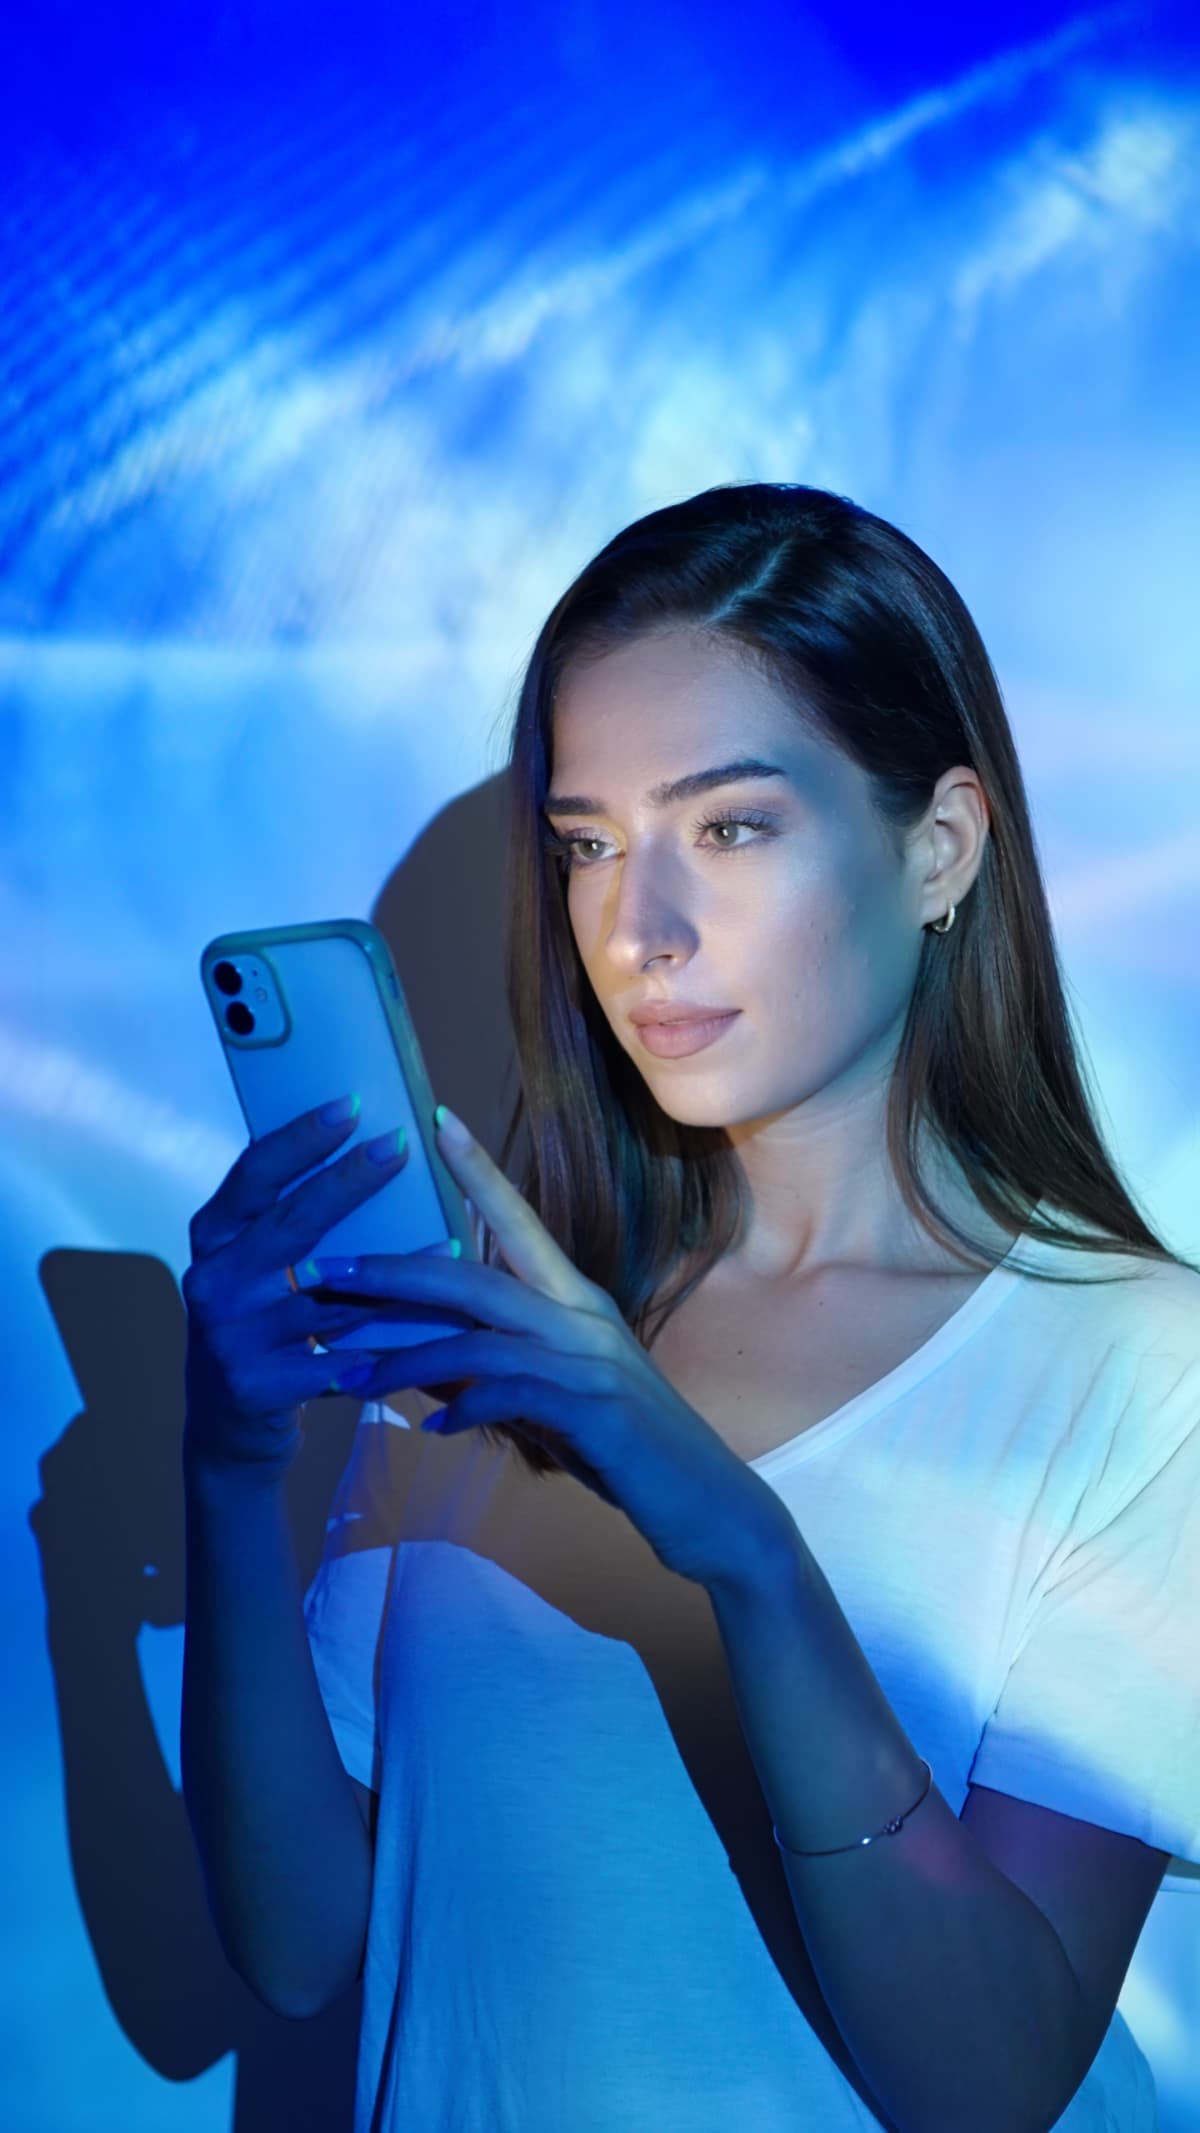 A woman looks at her phone screen with blue light background